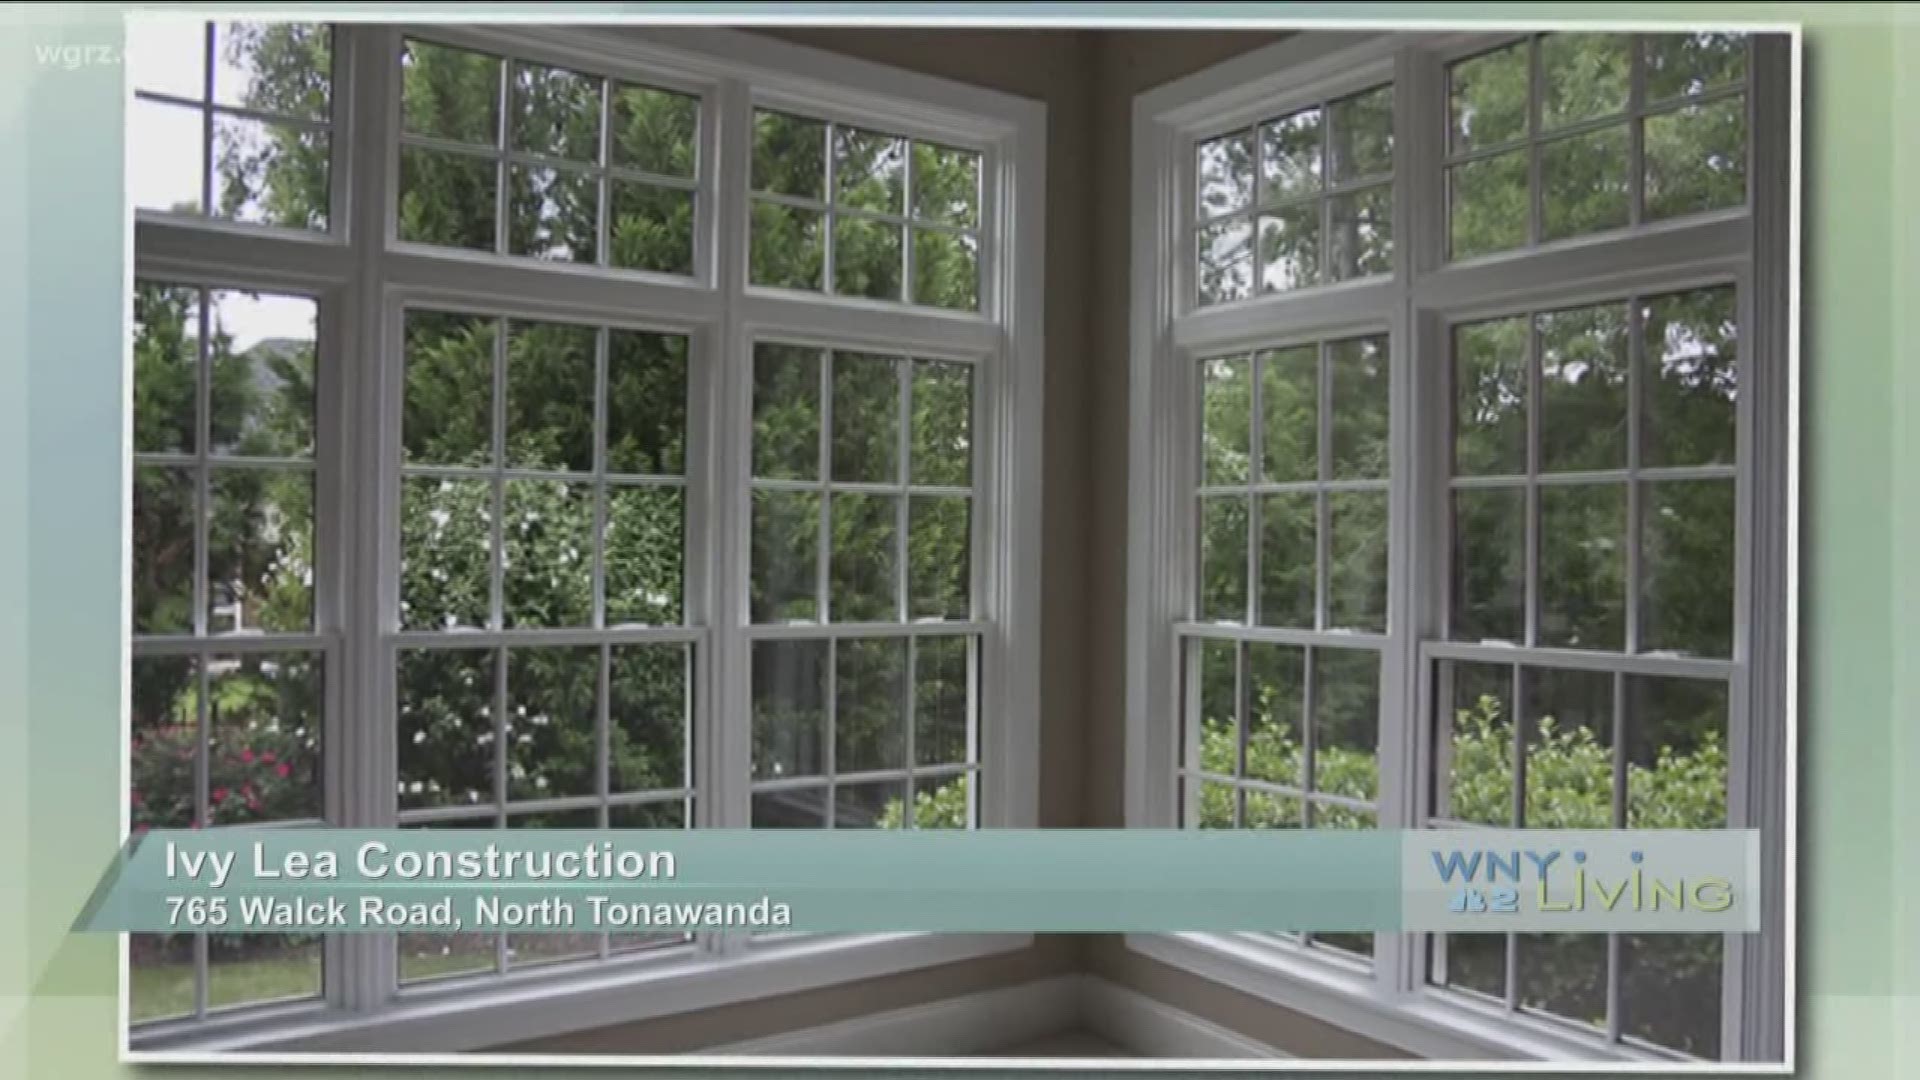 WNY Living - July 6 - Ivy Lea Construction (SPONSORED CONTENT)